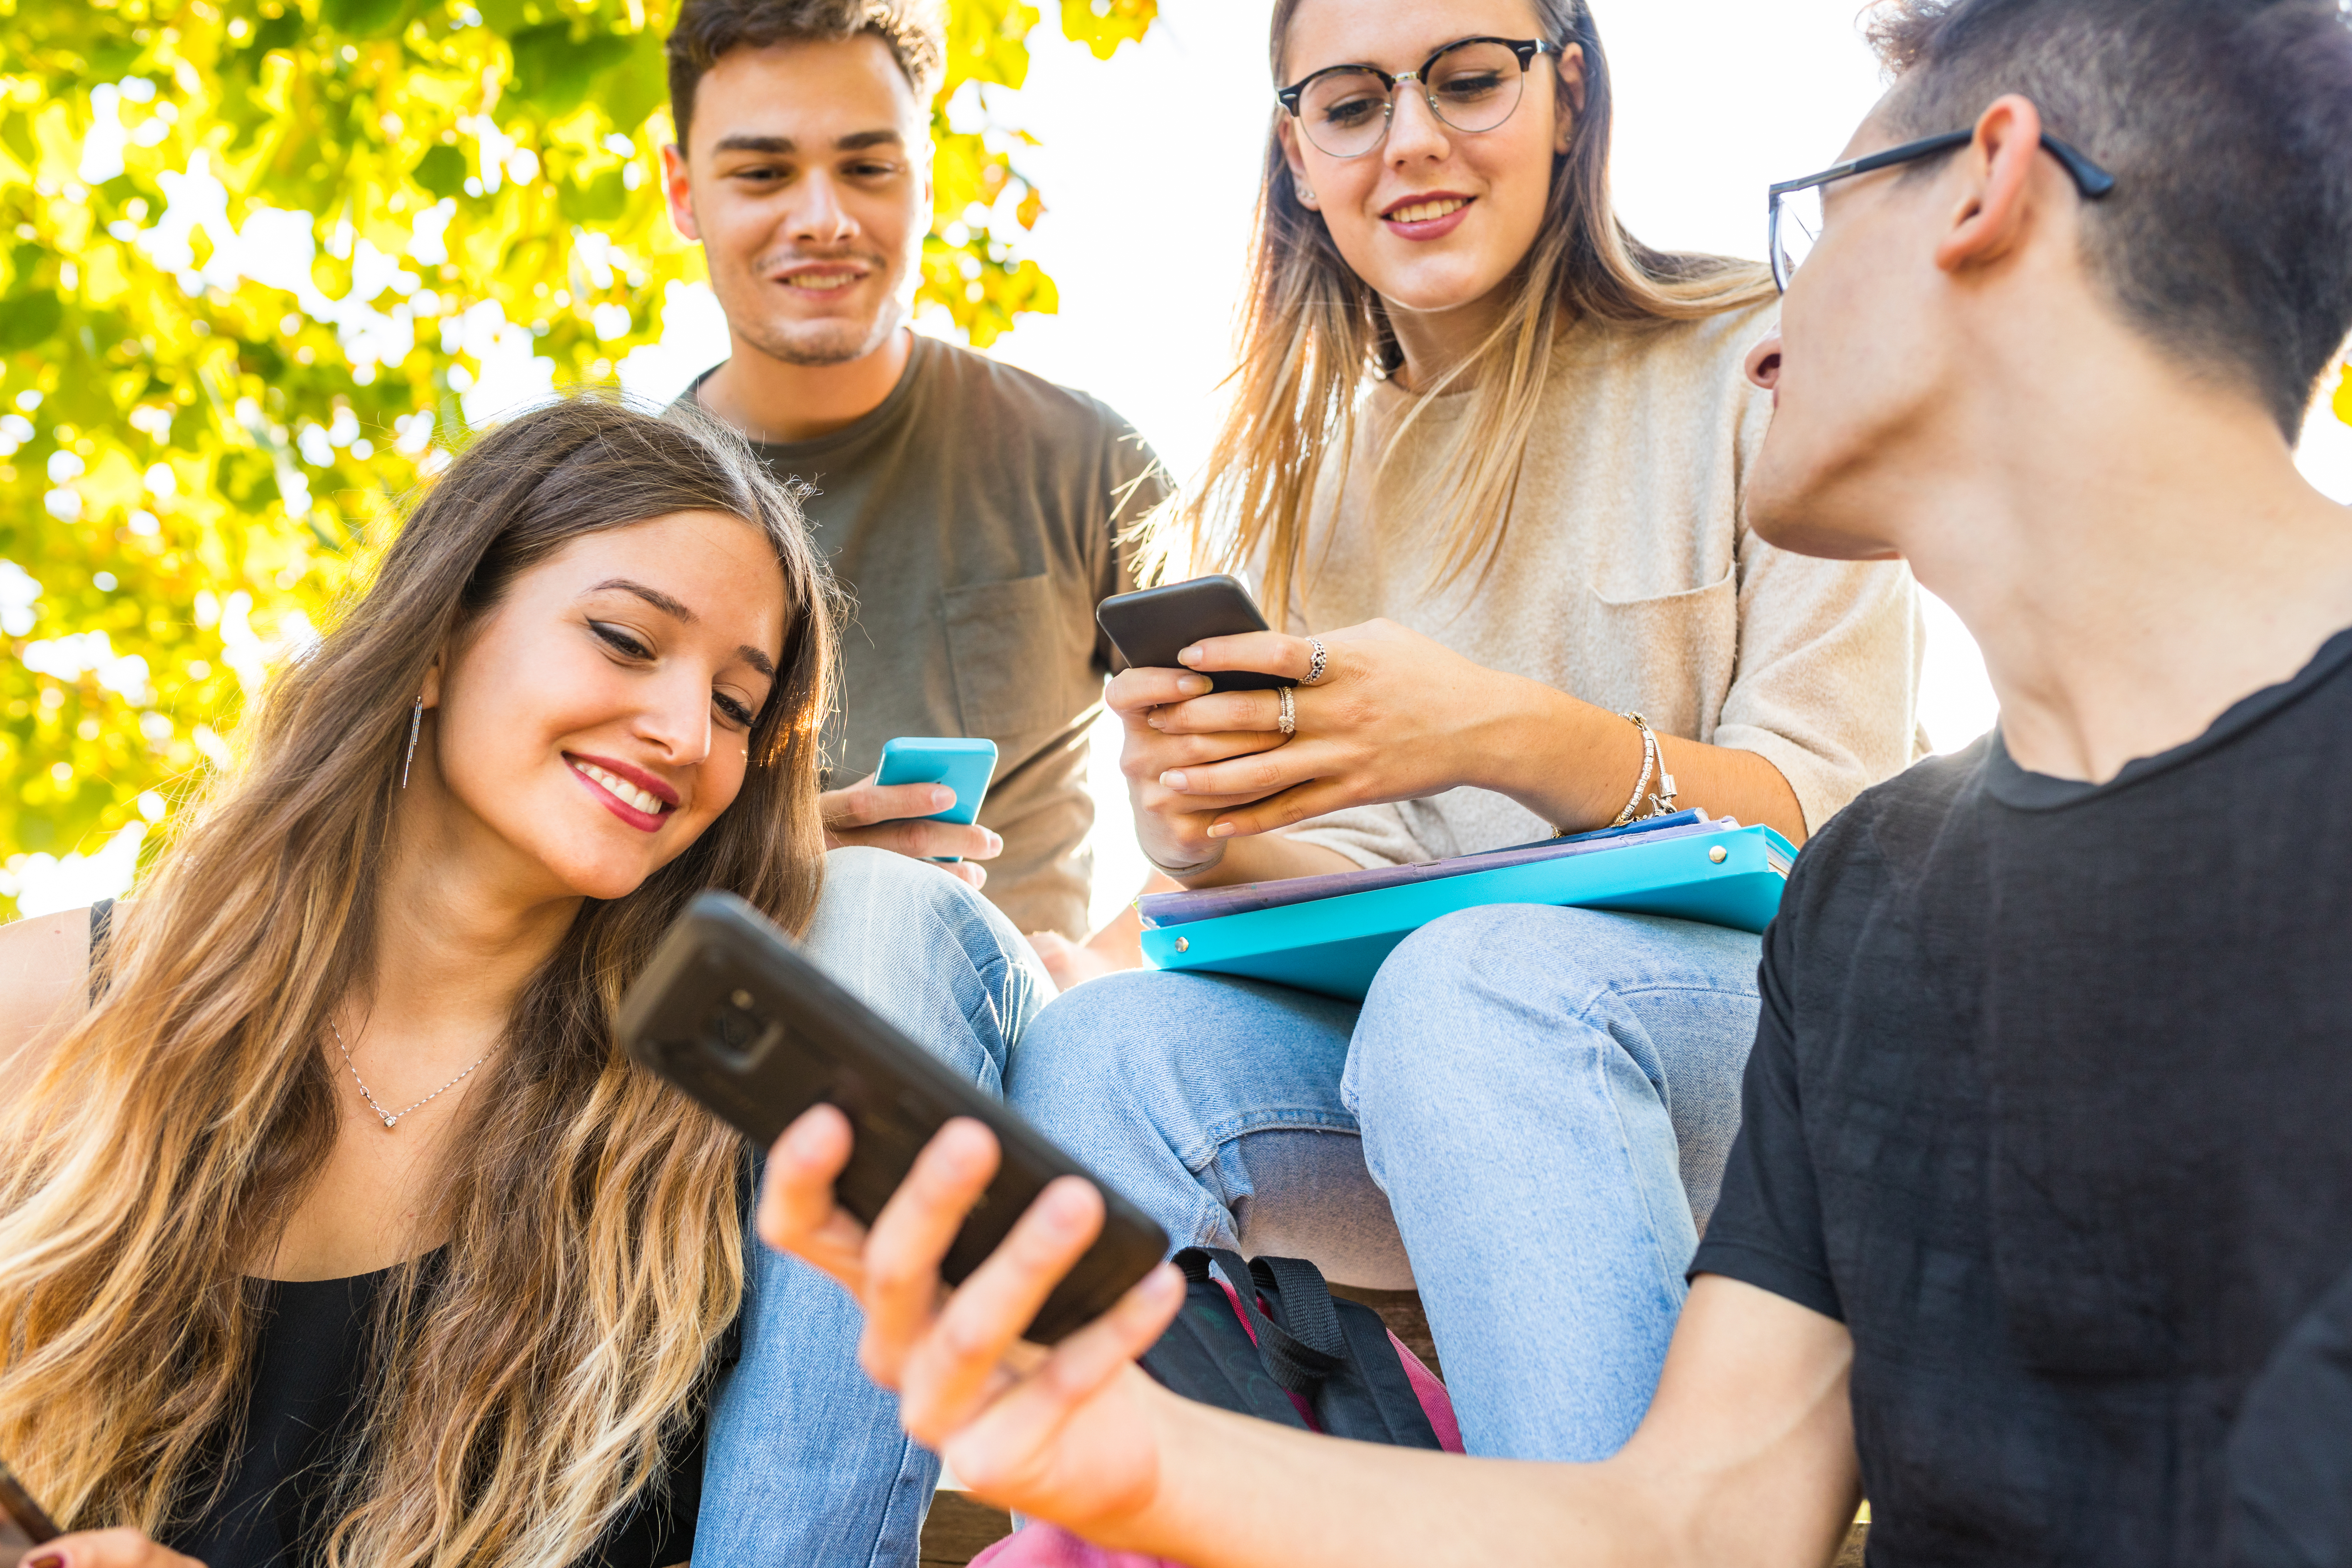 Teen group of friends with smartphones at park. Millennials best friends using mobile phones, addicted to technology and social media. Lifestyle and friendship concepts